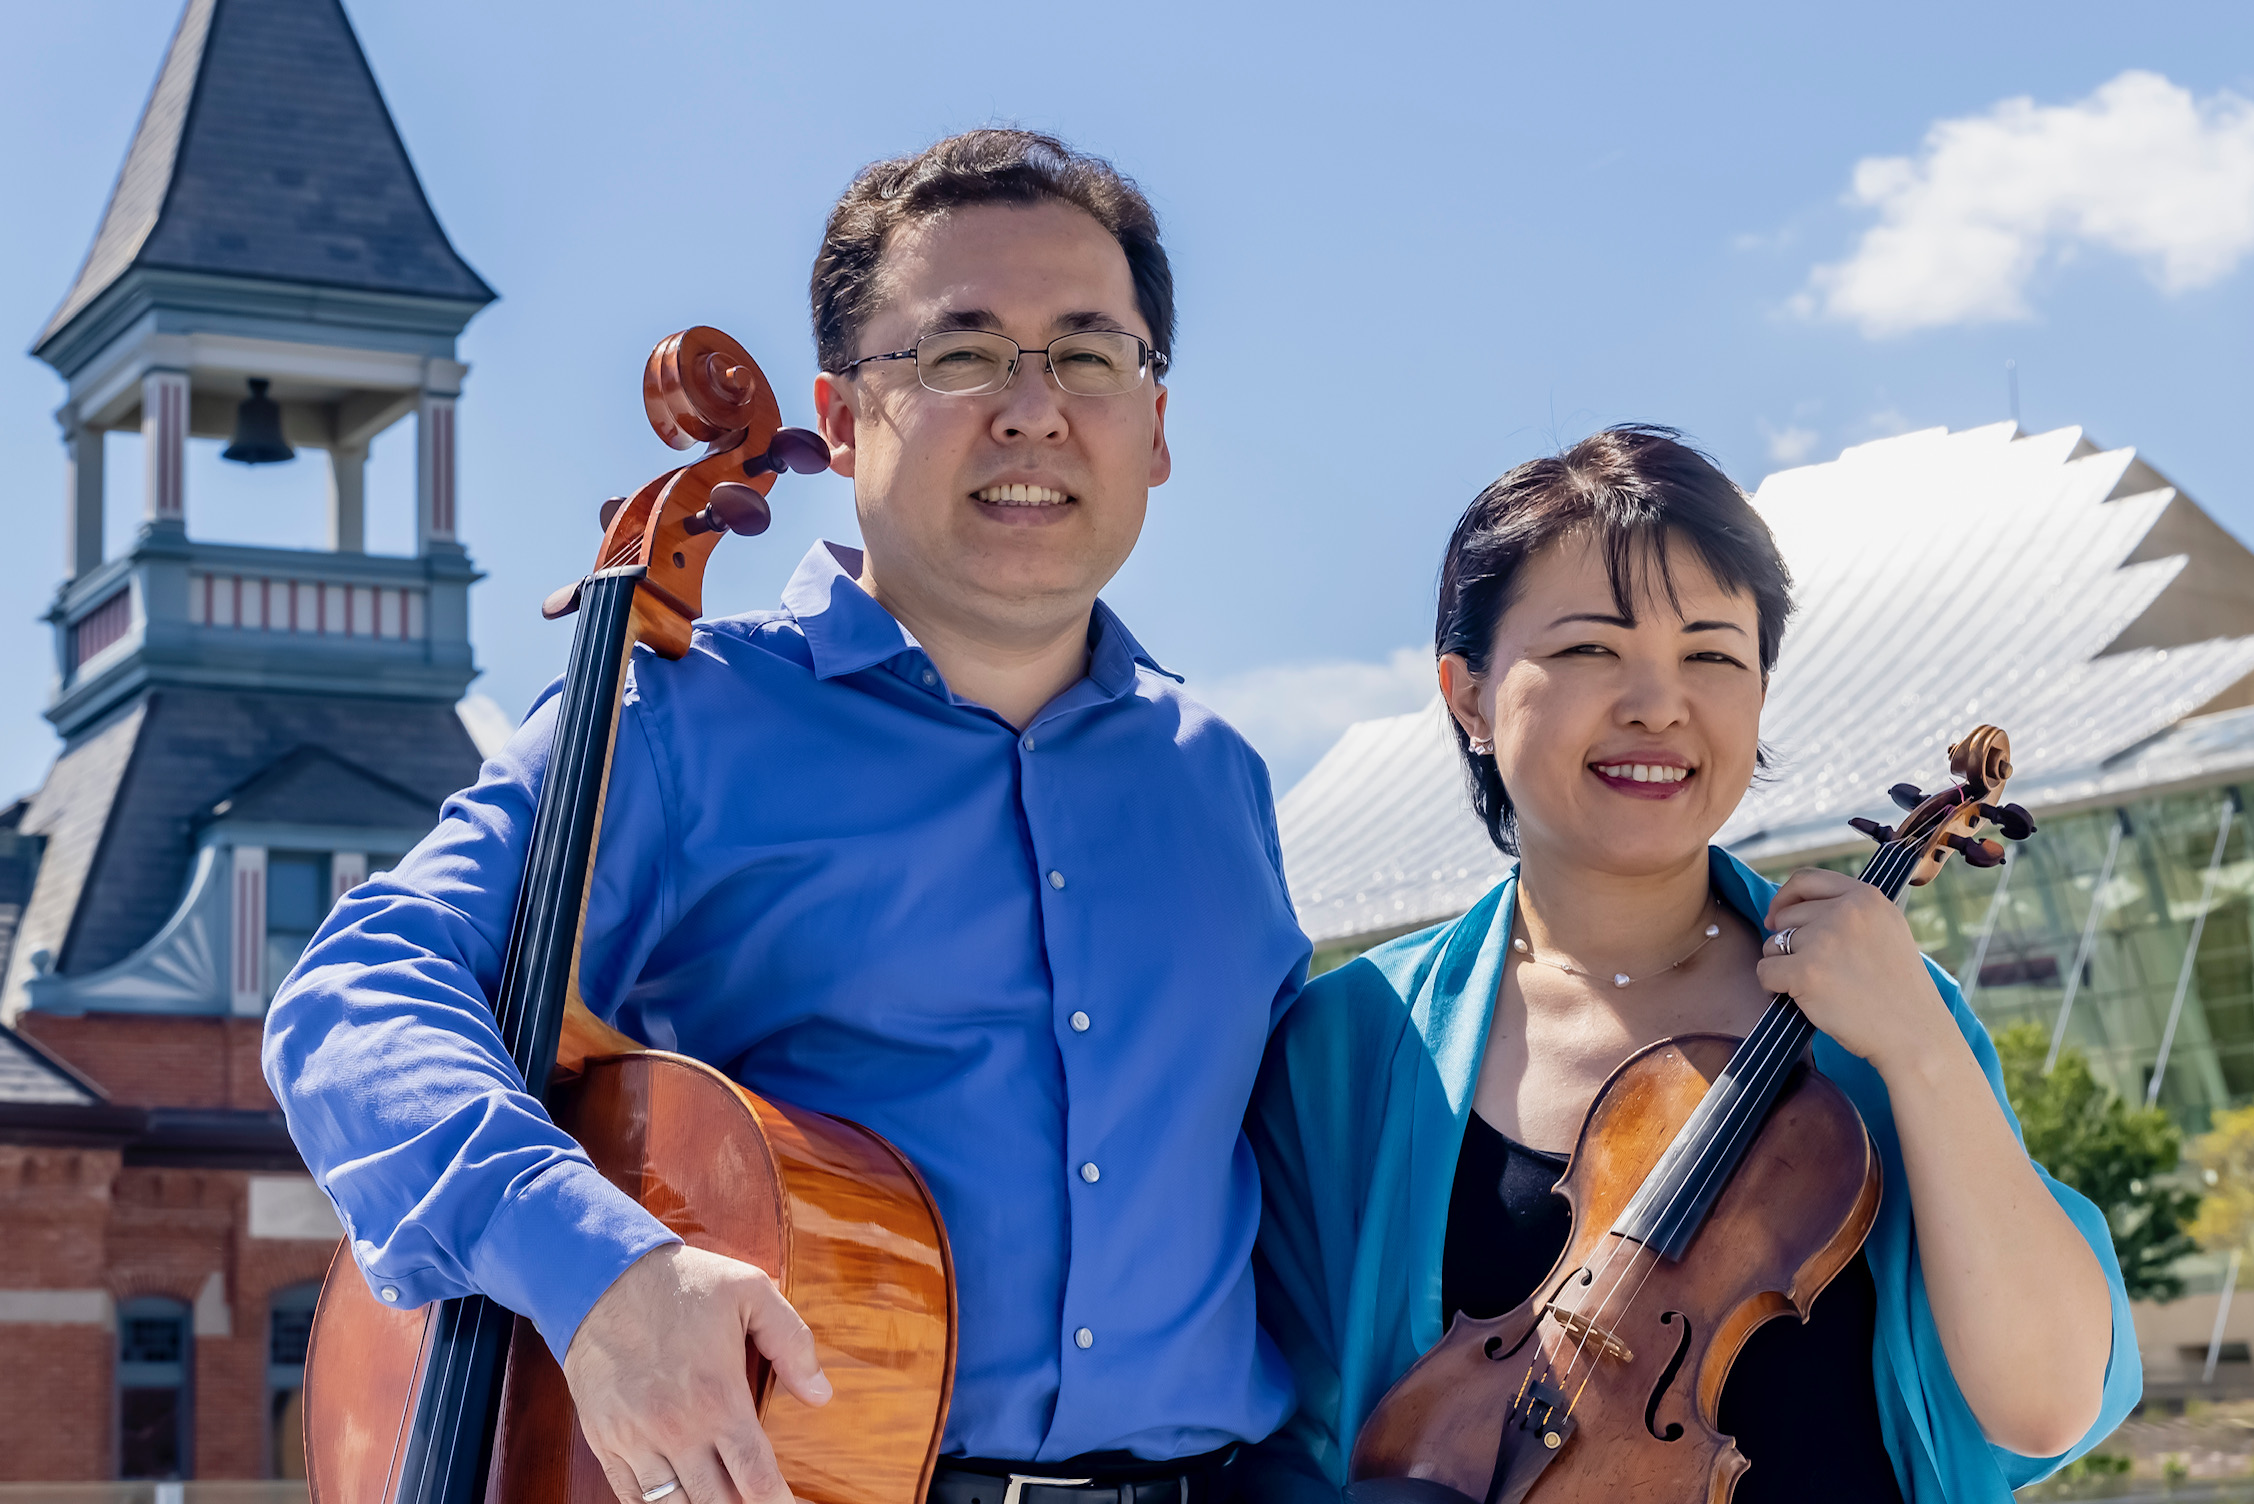 SIMPLE TWISTS OF FATE: Symphony couple finds niche in the heartland